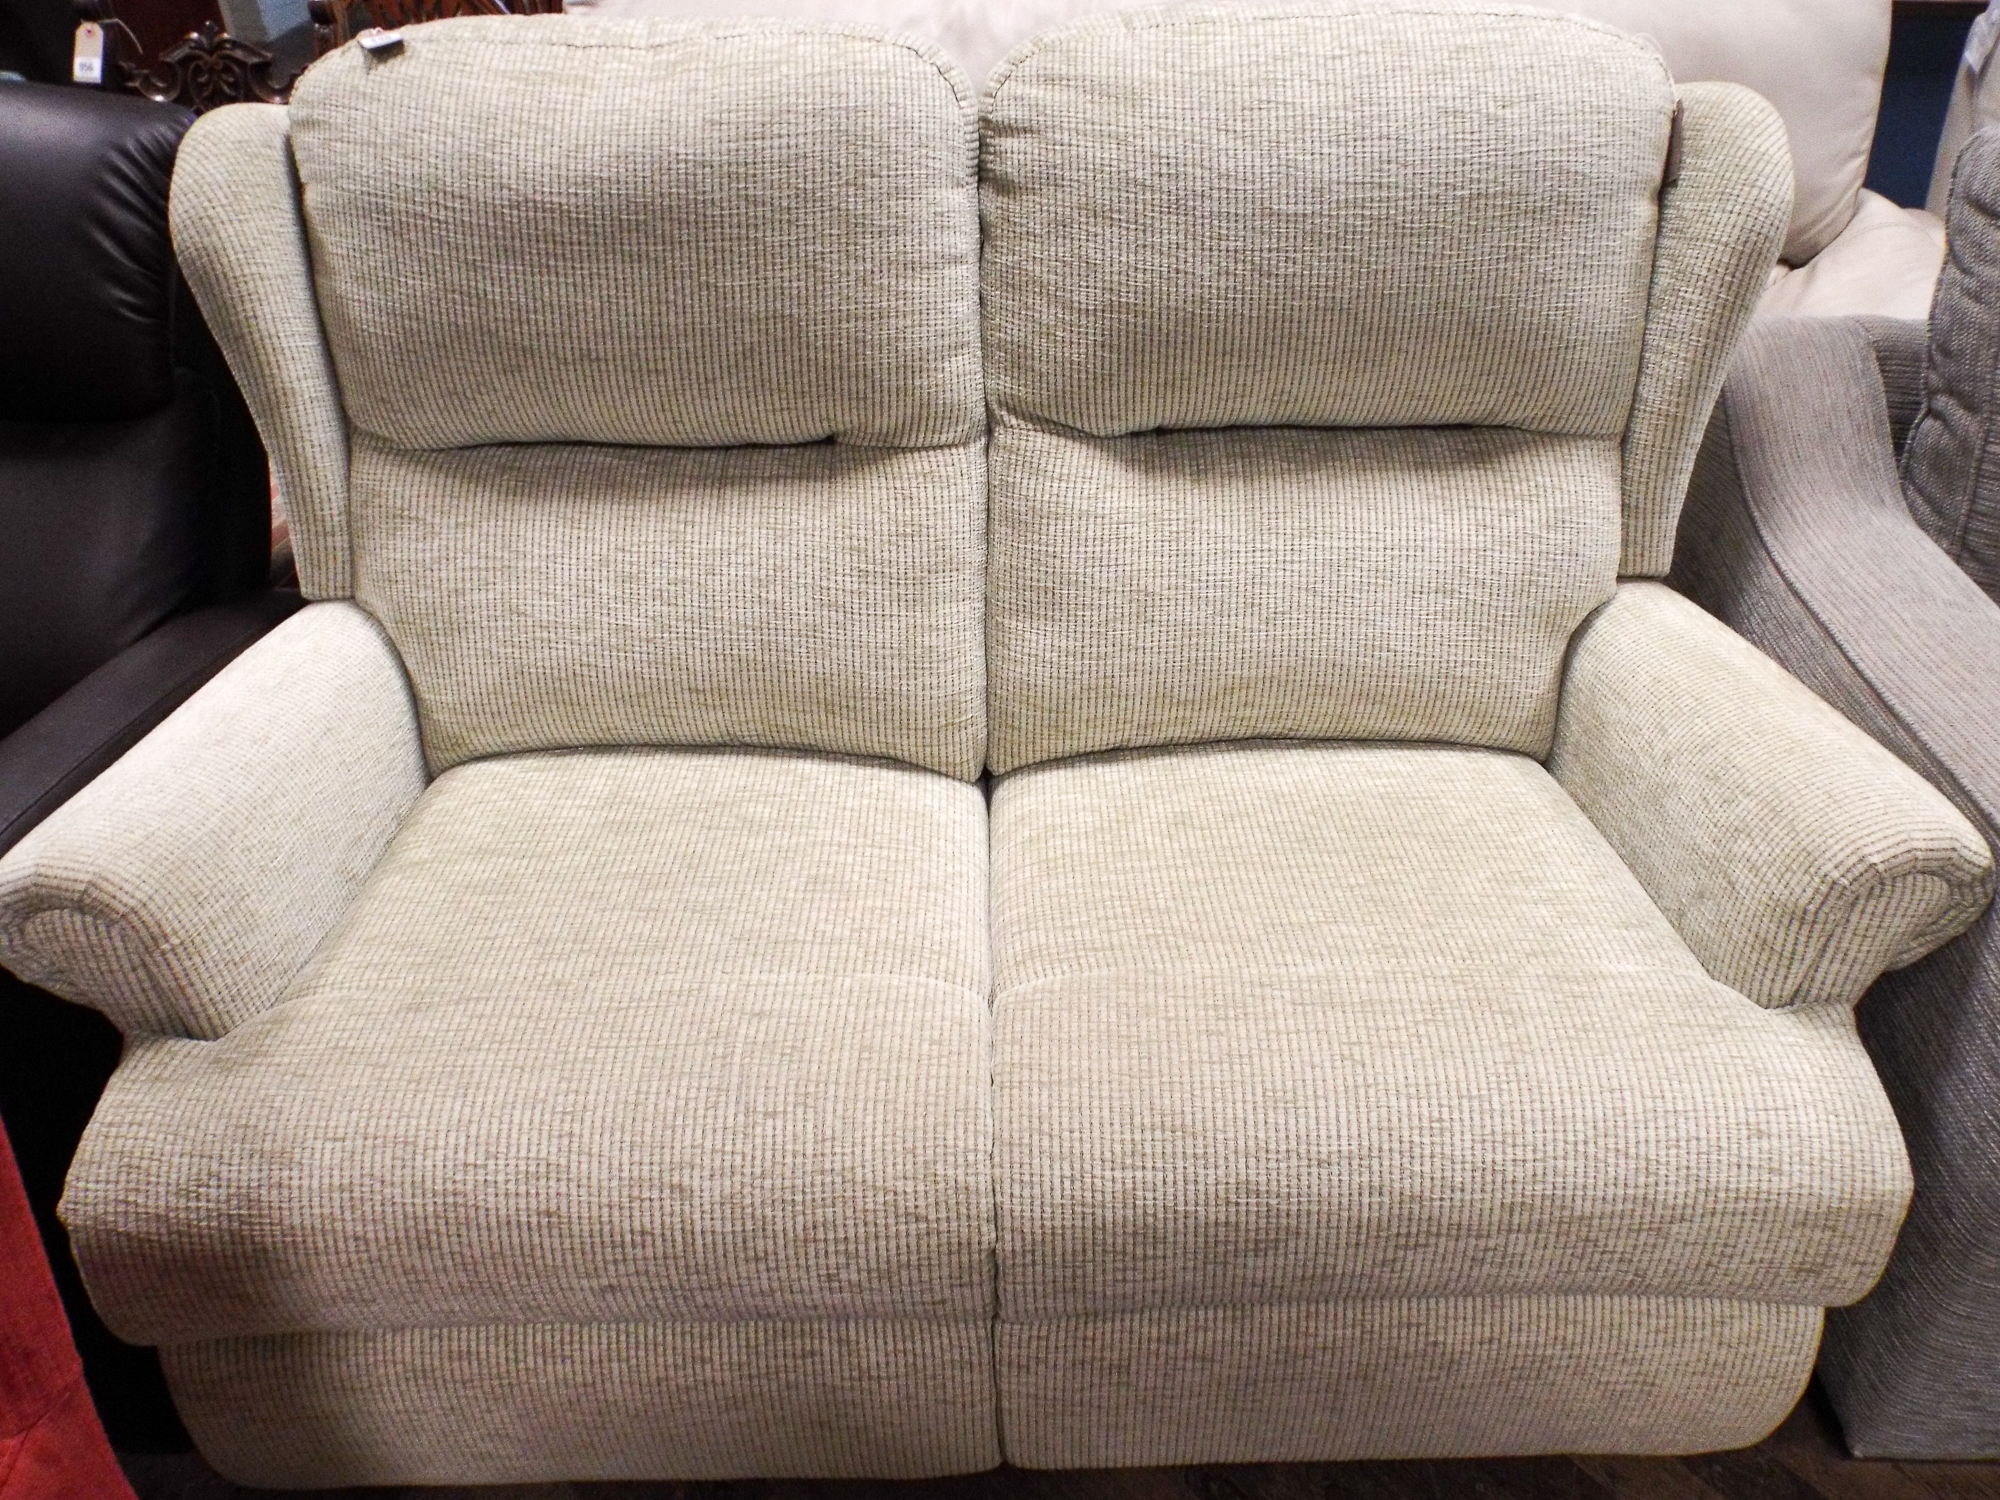 A modern two reclining seater settee in pale green mottled material